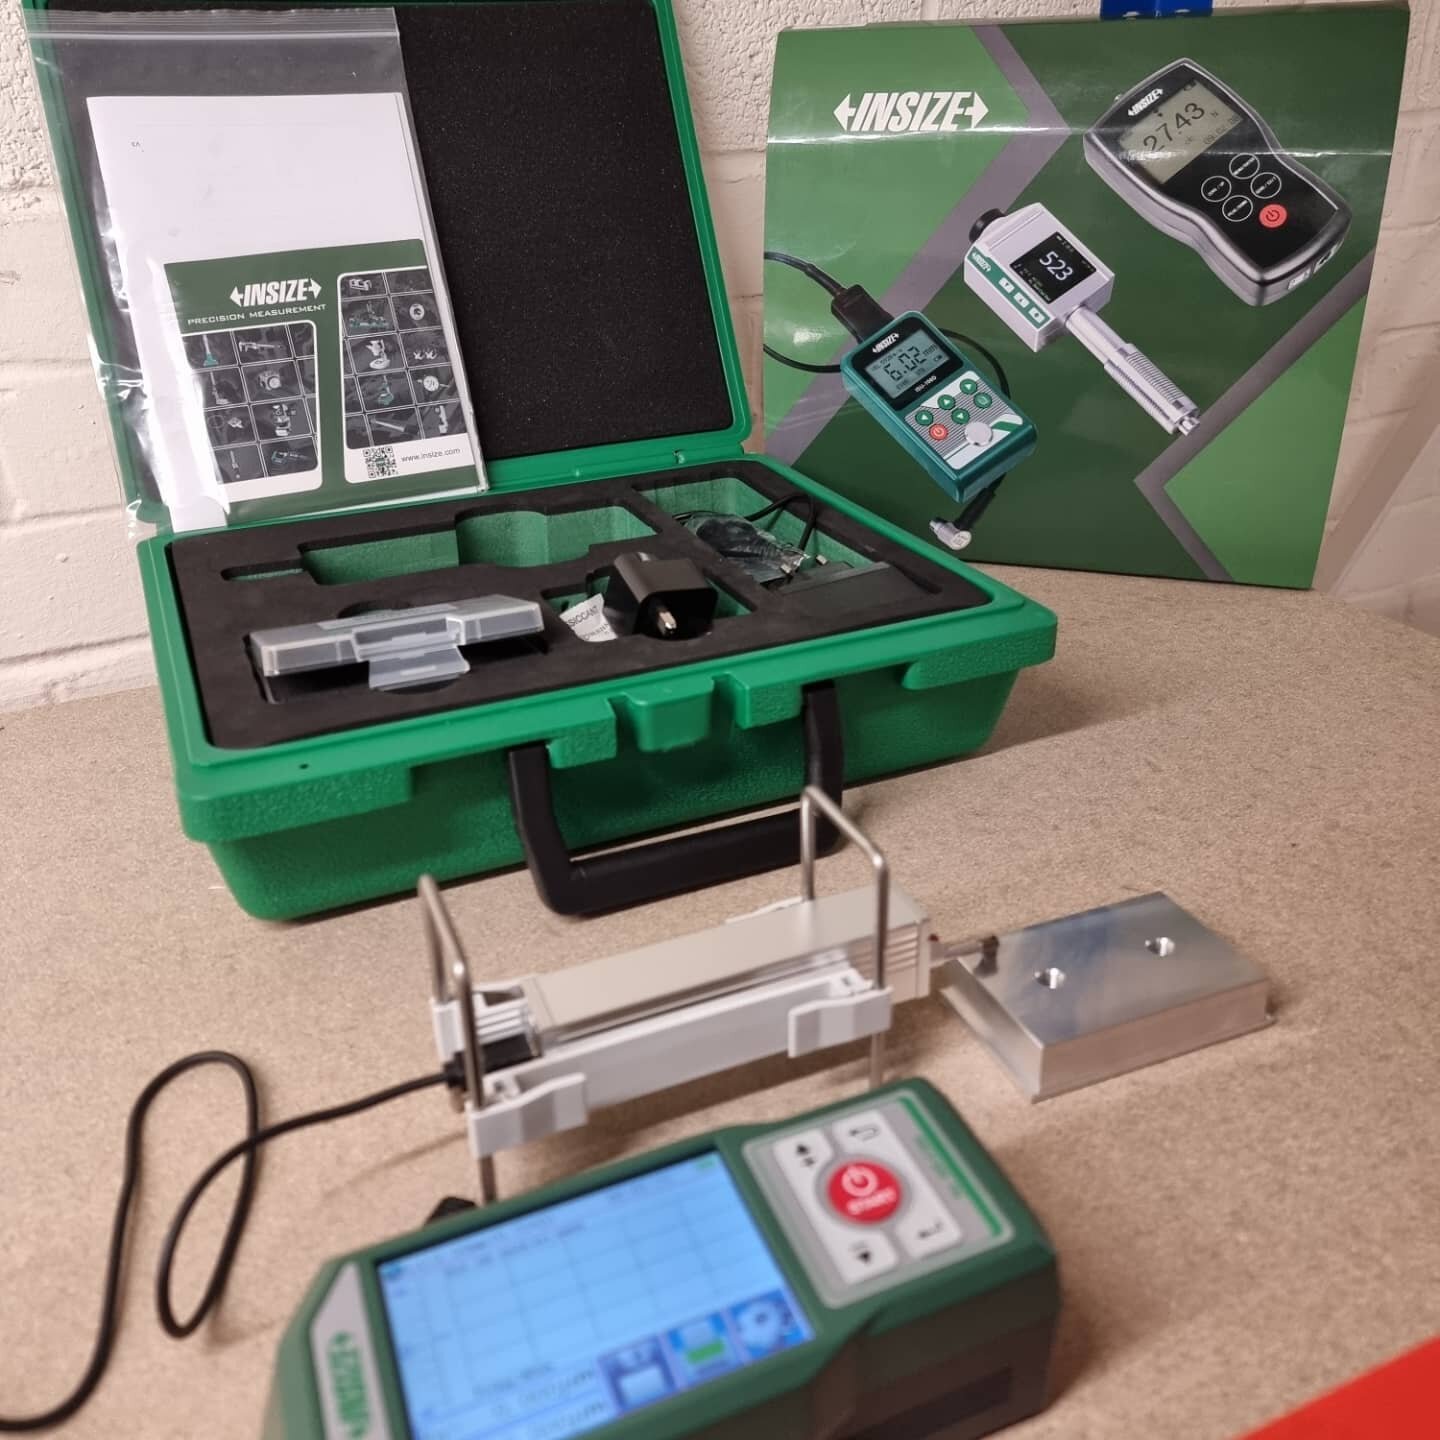 Inspection upgrades at promac with a new surface roughness tester!

#cncmachining #milling #britishmanufacturing&nbsp; #cncmilling #fanuccnc #cncmachinist #cnc #drilling #promacprecision #carbidetools #cutwell #cnc #drilling #millingmachine #promacpr